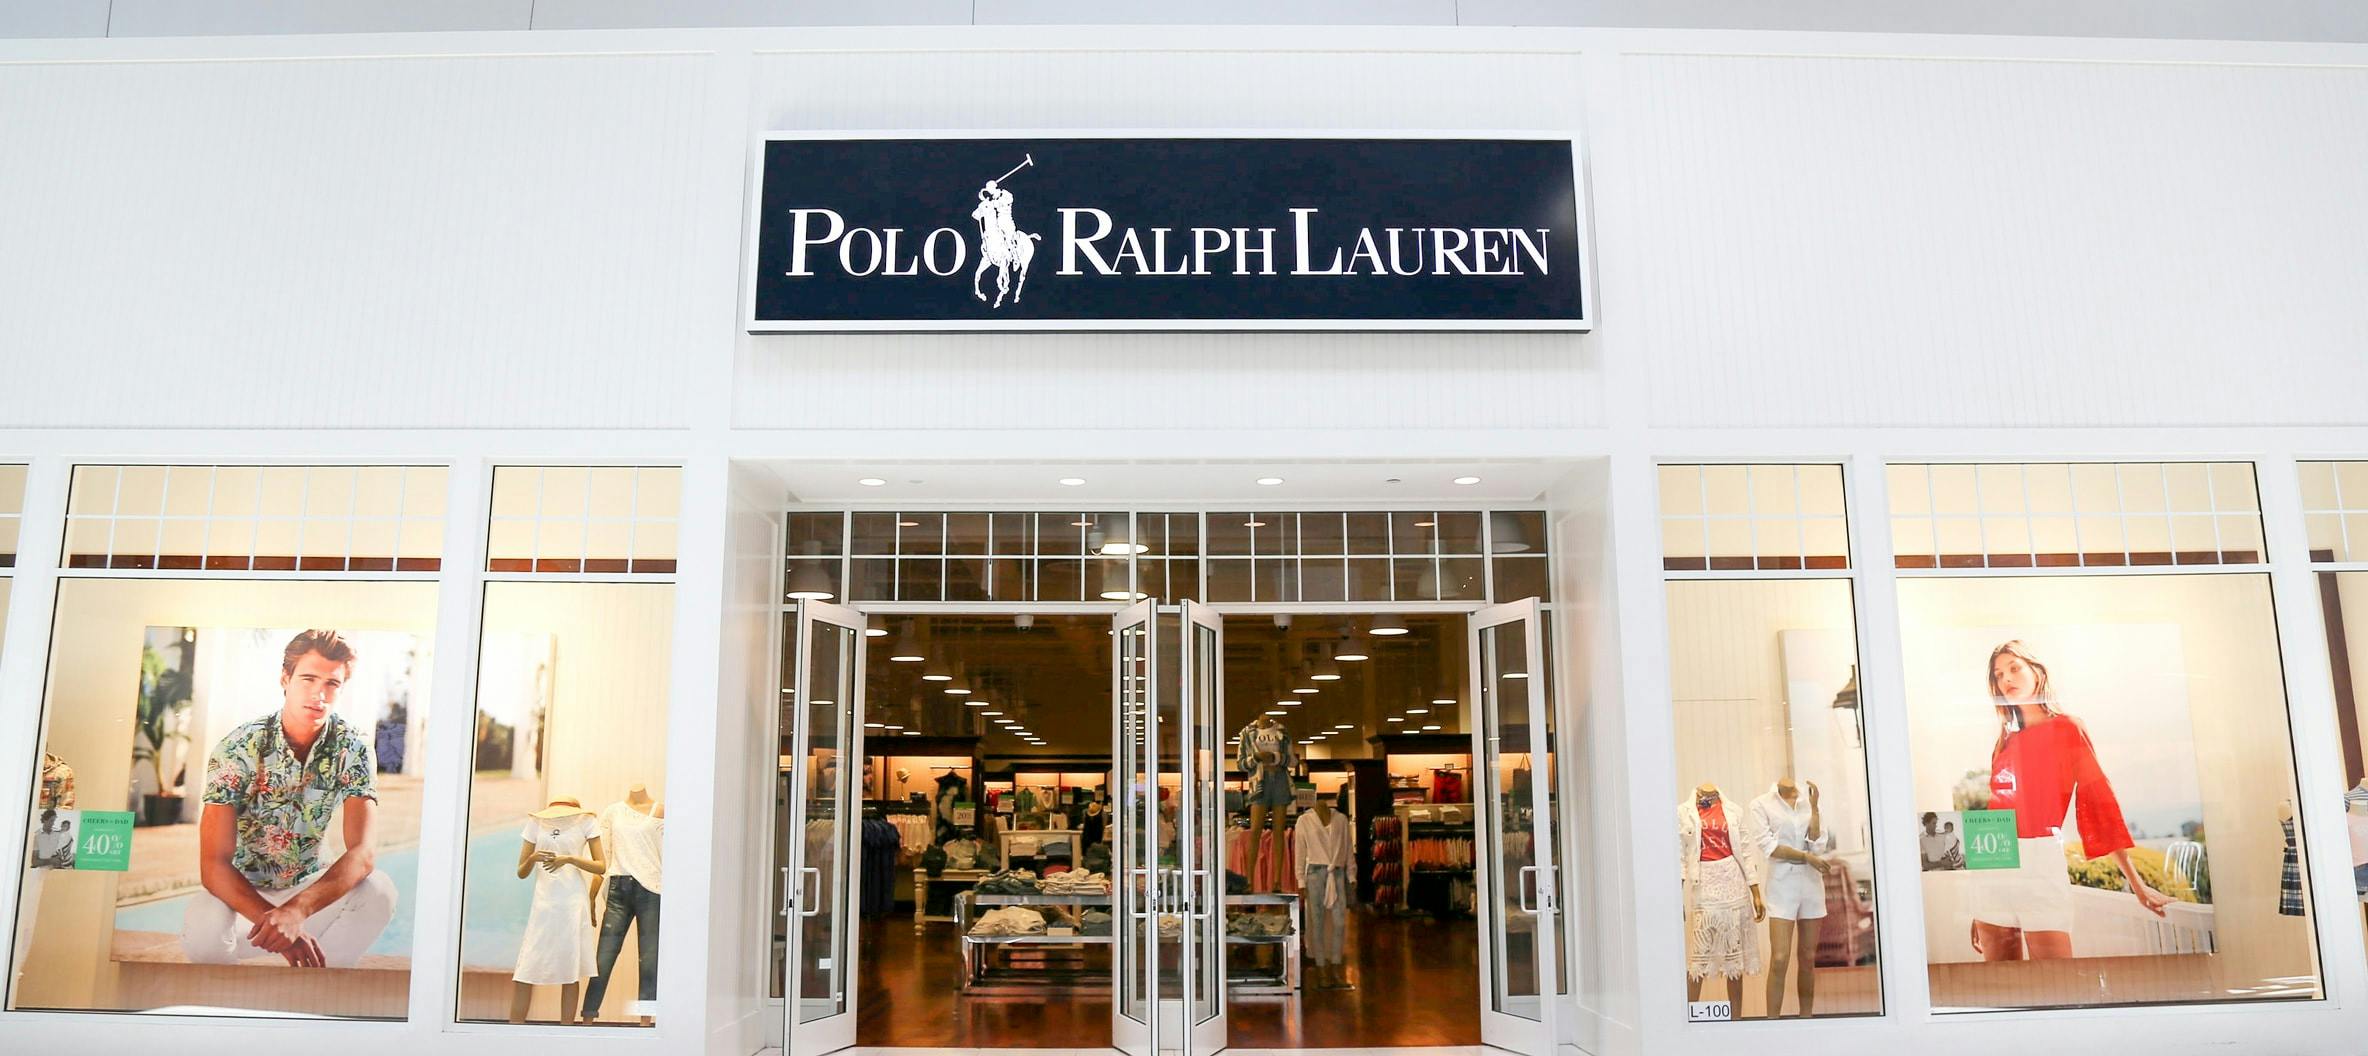 froid silencieux harpon polo ralph lauren outlet exchange policy ...